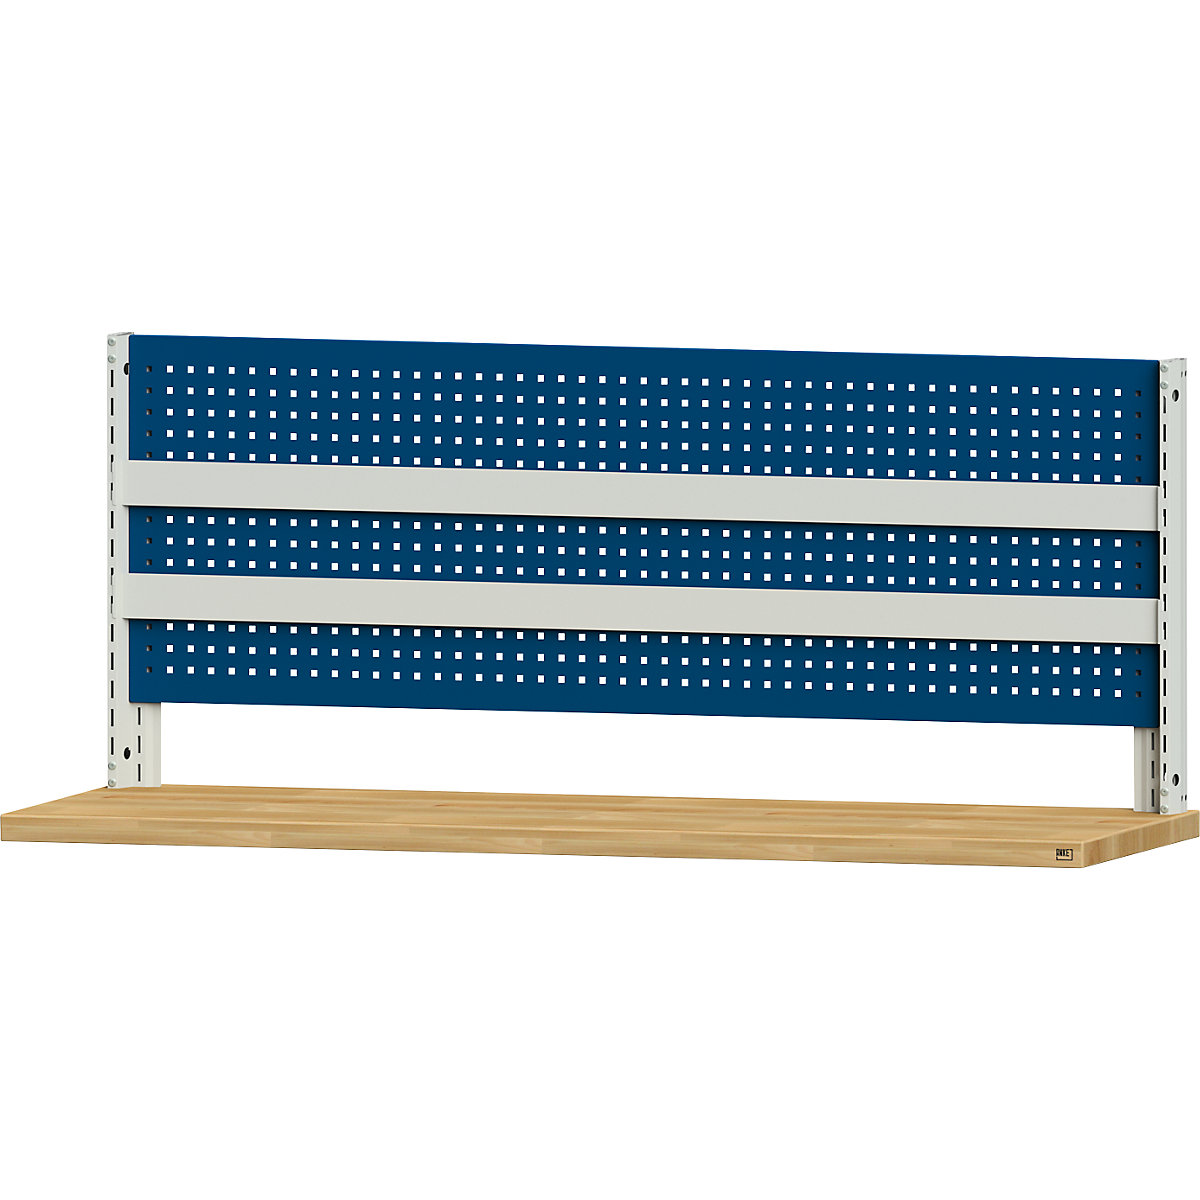 Modular system for electric LIFT work table – ANKE, with 2 perforated panels, 2 suspension rails, for width 2000 mm